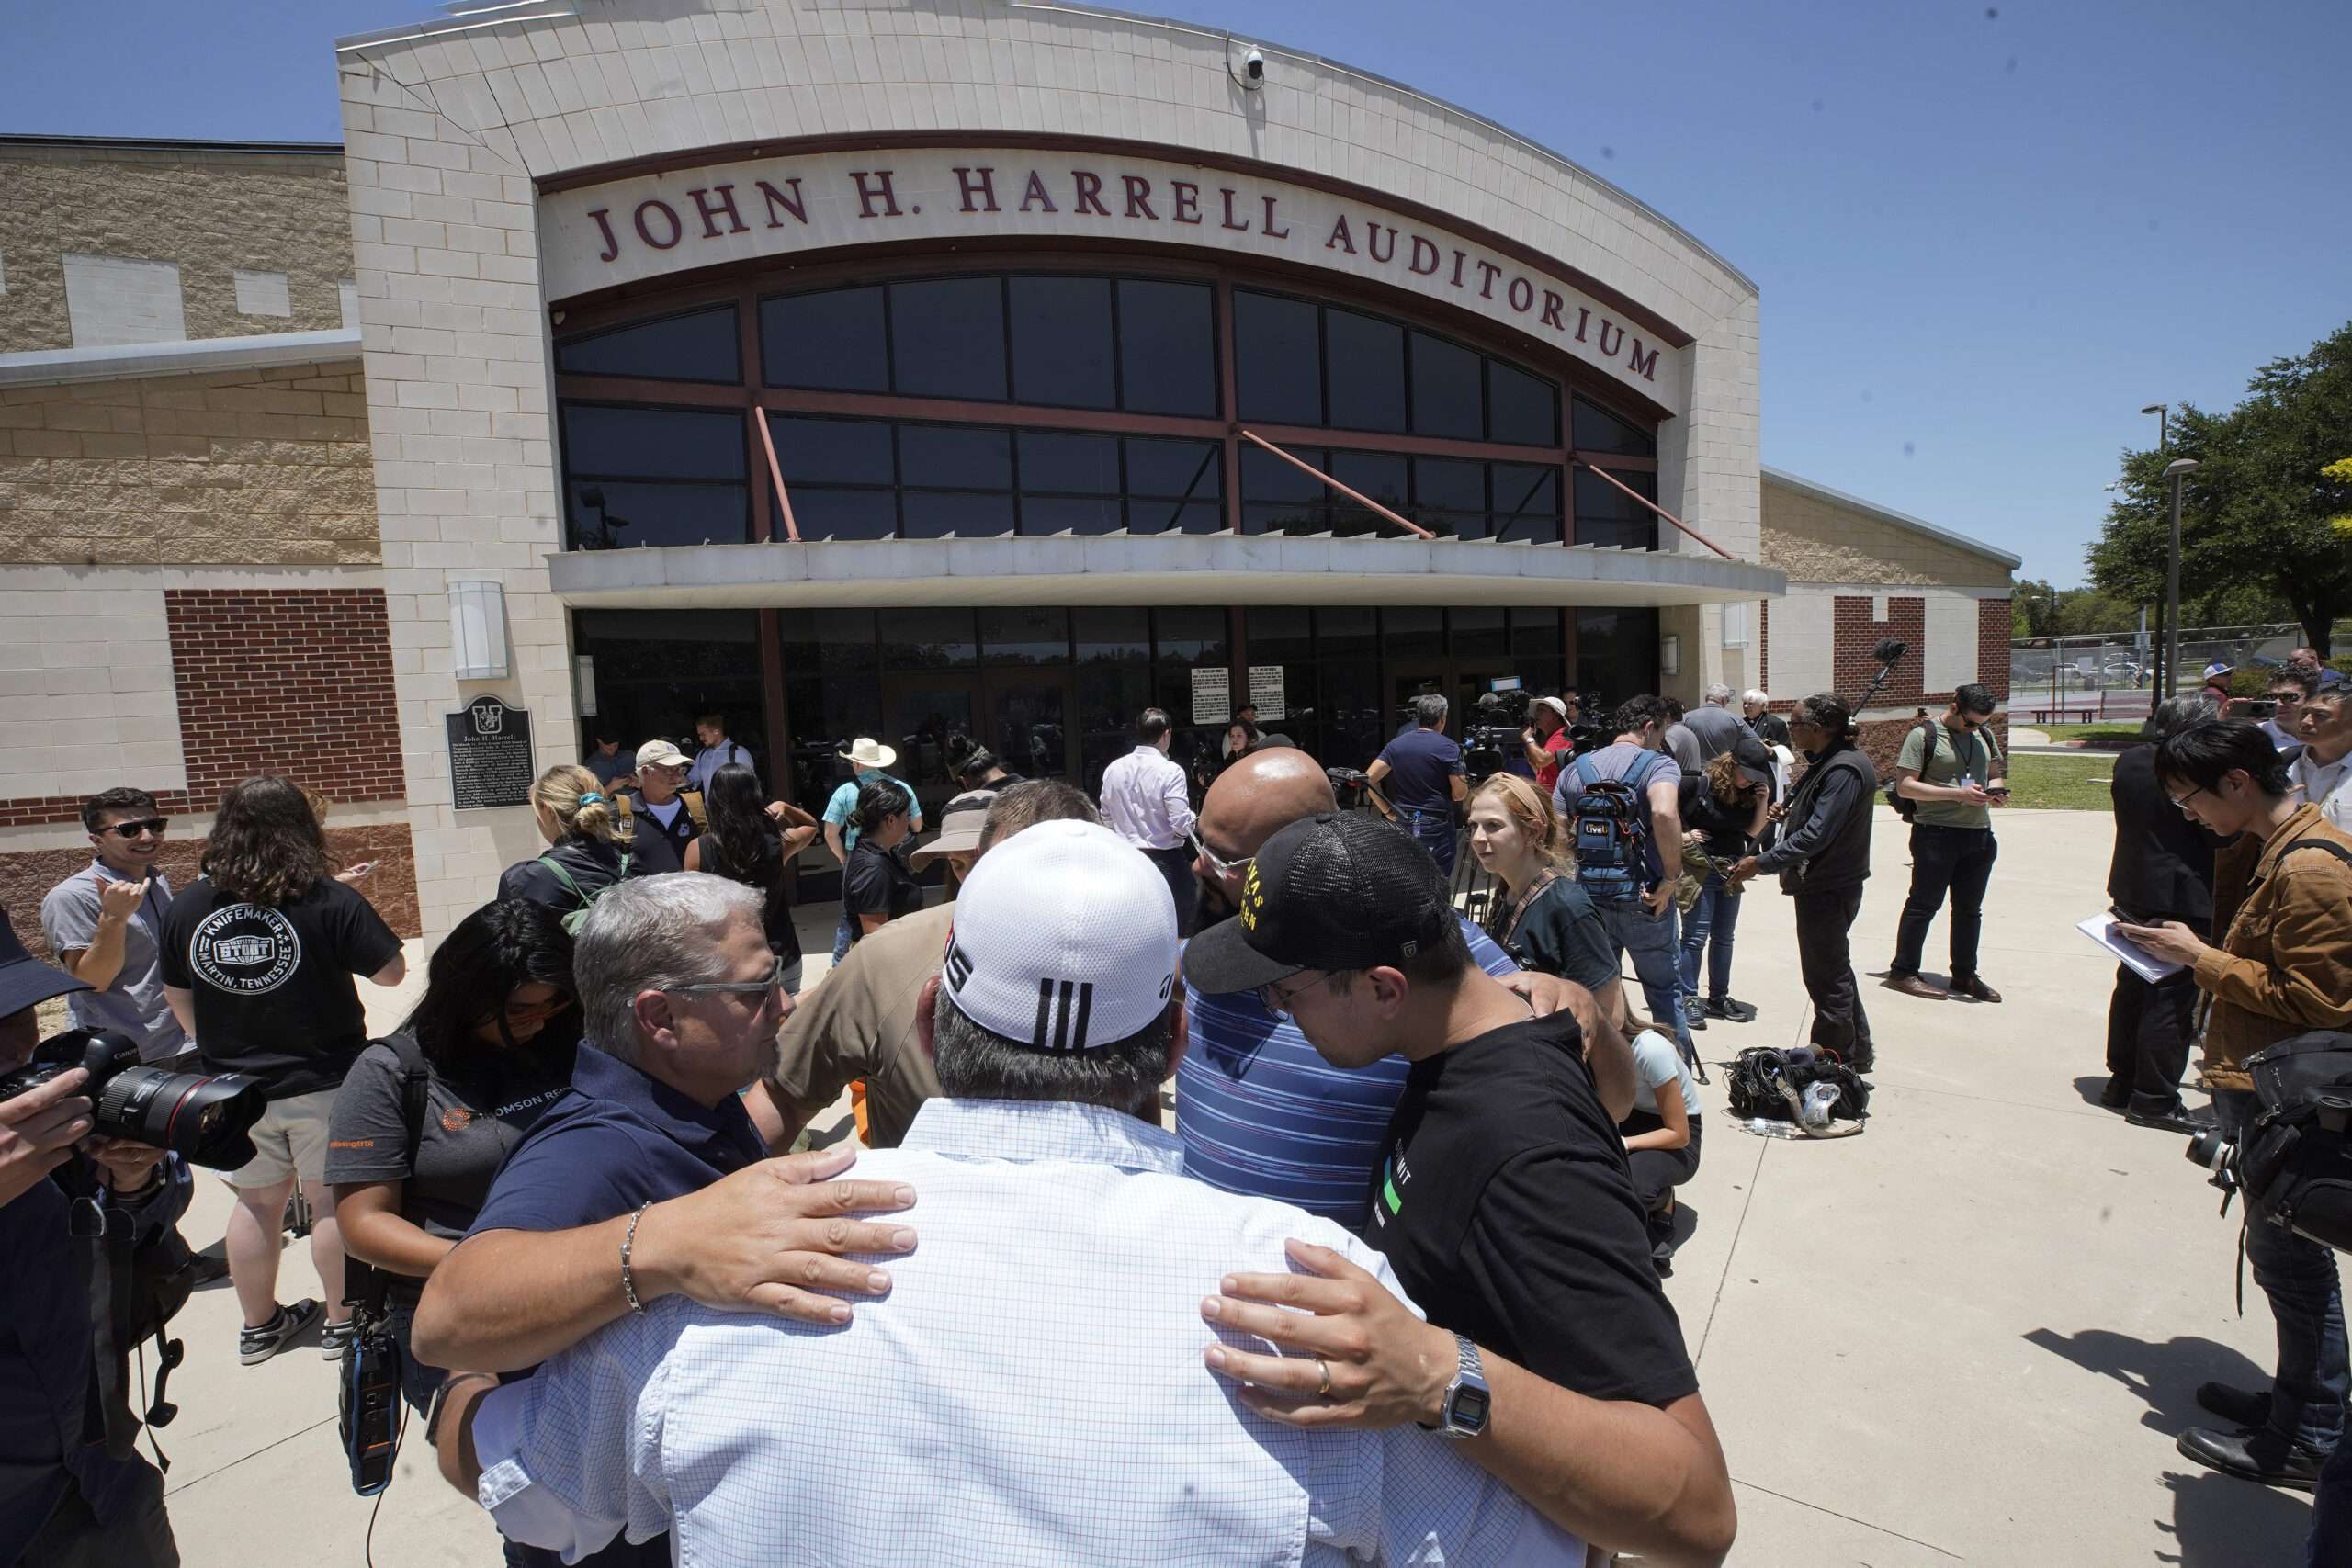 There Have Been 13 Mass School Shootings Since 1966, Not 27 This Year